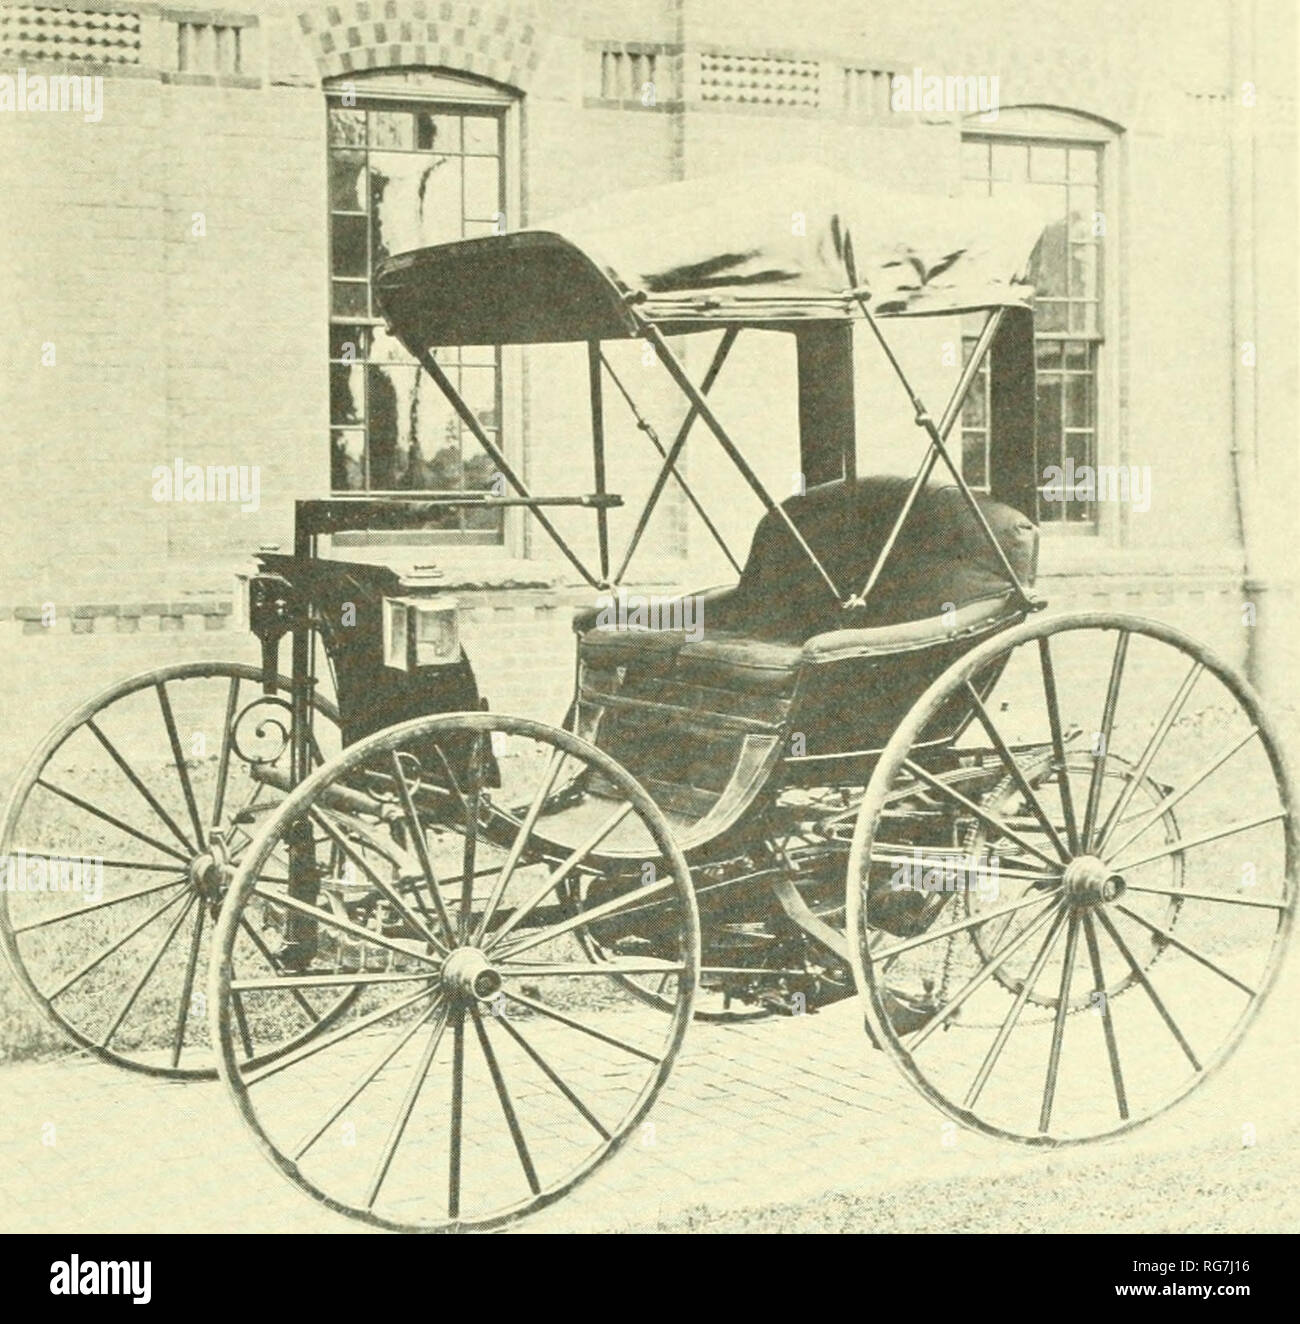 . Bulletin - United States National Museum. Science. $mm Figure 15.—Early photo of the 1893-94 Duryea gasoline automobile, now in the National Museum. Charles E. and J. Frank Duryea, whose work is repre- sented in the National Museum by their 1-cylinder vehicle (fig. 15) of 1893-94, were notable among the American pioneers. A 2-cylinder, pneumatic-tired Duryea vehicle (fig. 16) was driven by J. Frank Duryea to victory in the Chicago Times-Herald automobile race from Chicago to Evanston and back on Thanksgiving Day, November 28, 1895. (This car was unfortunately destroyed through a workman's mi Stock Photo